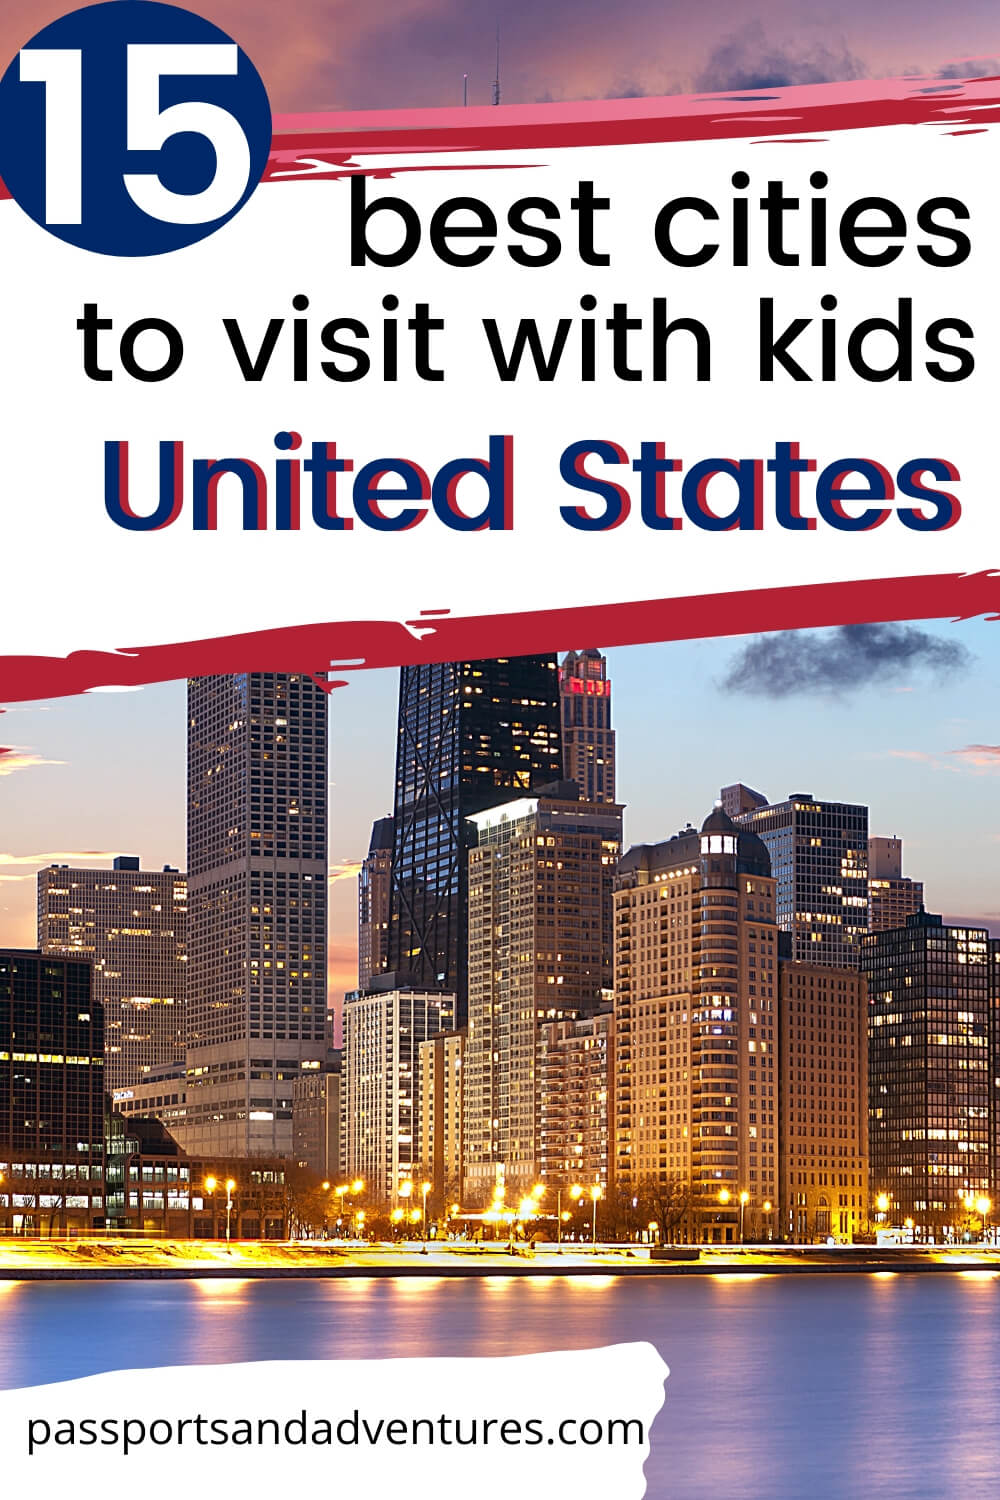 best us cities to visit with family